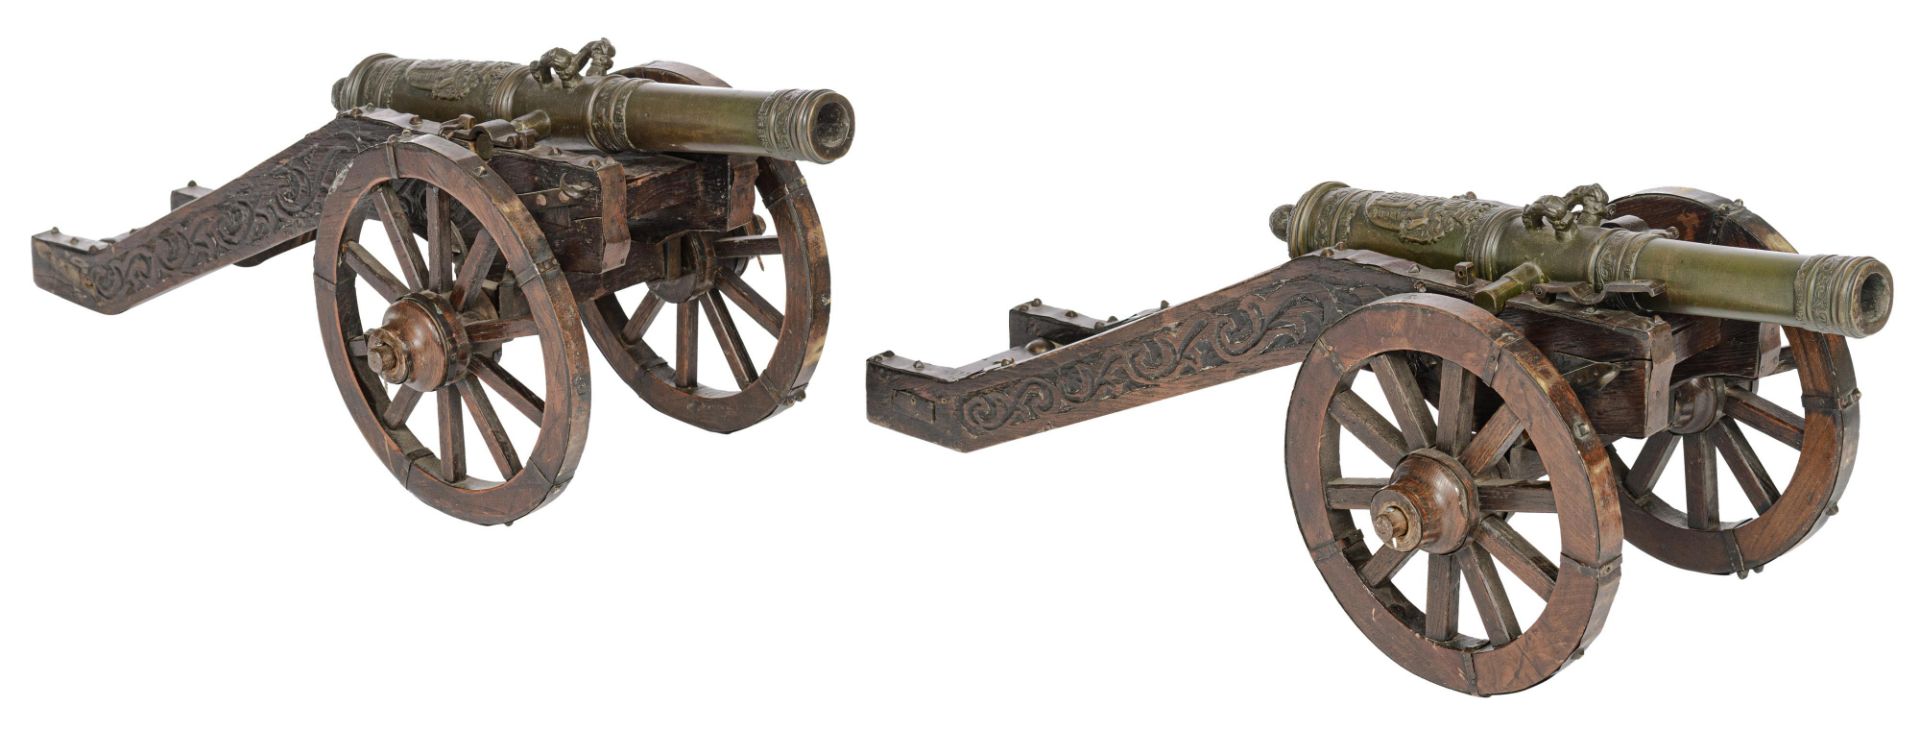 A pair of miniature bronze cannons, with the coat of arms of Dinant and inscription 'Nollet-Macret D